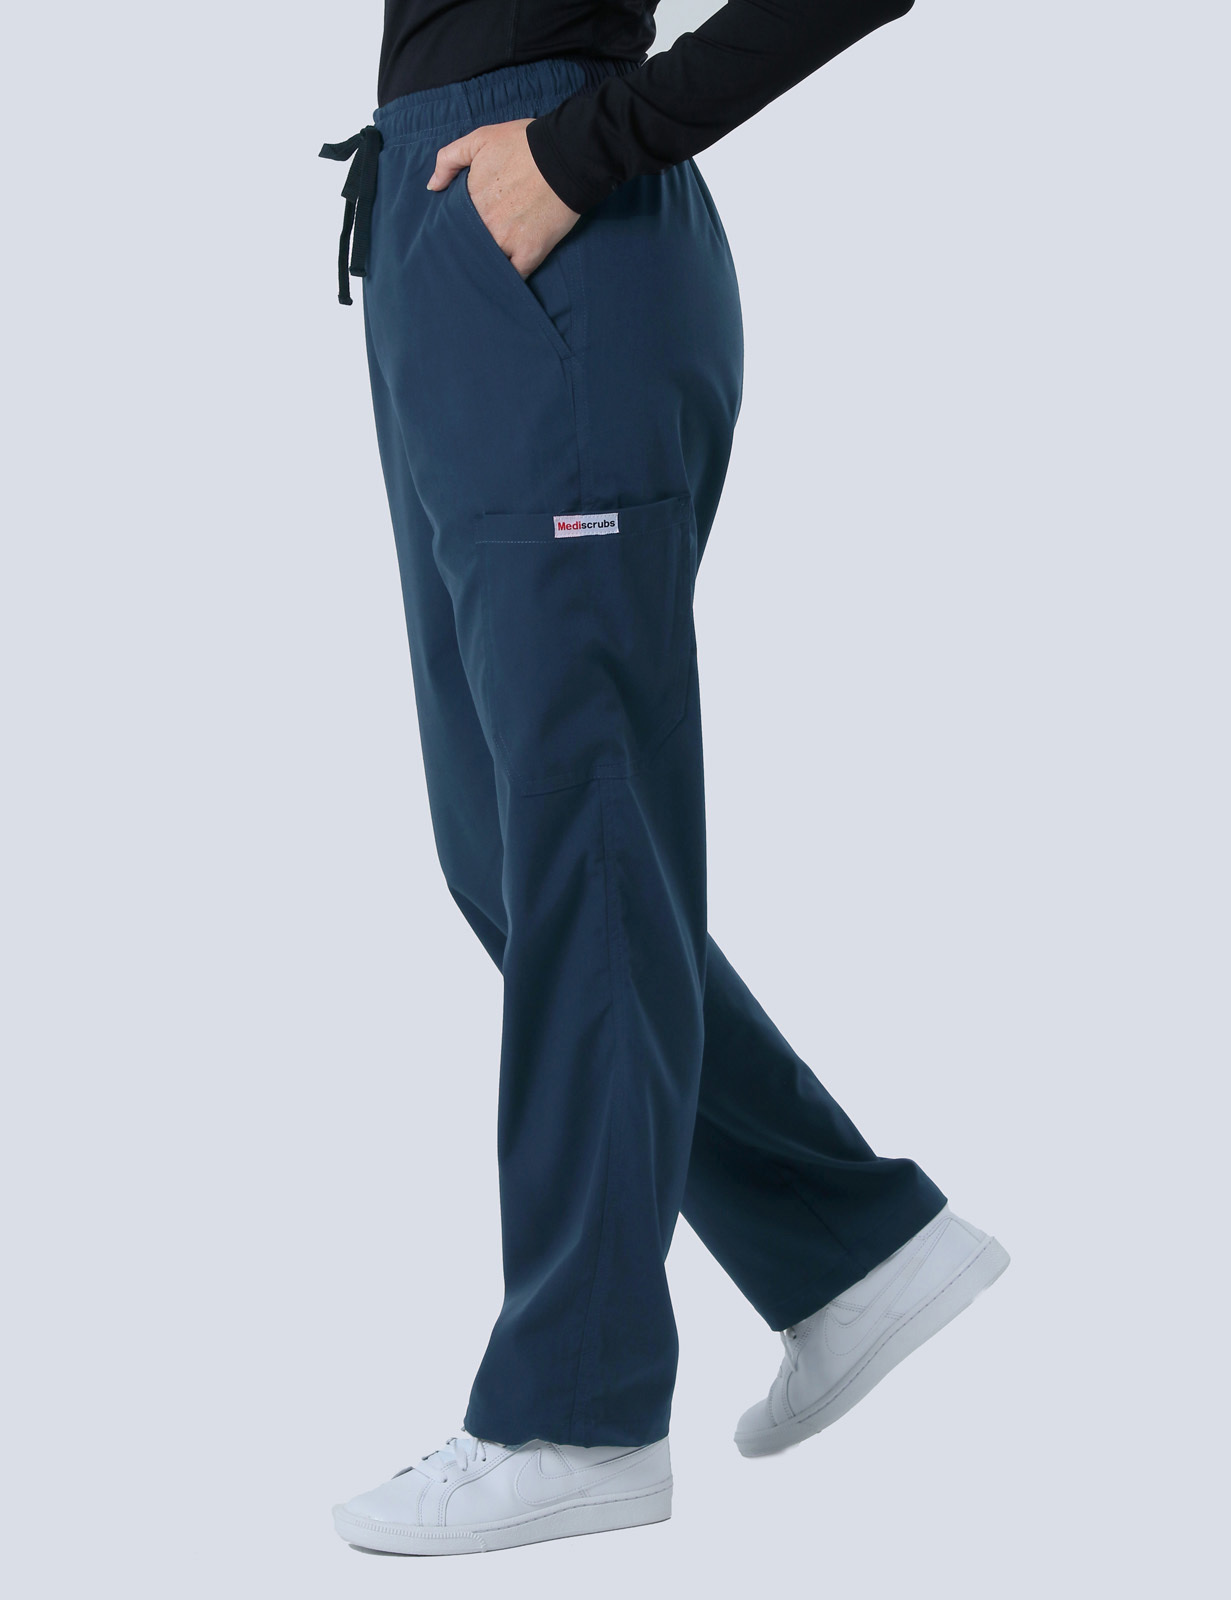 Logan Hospital - ICU CN (Women's Fit Spandex Scrub Top and Cargo Pants in Navy incl Logos)